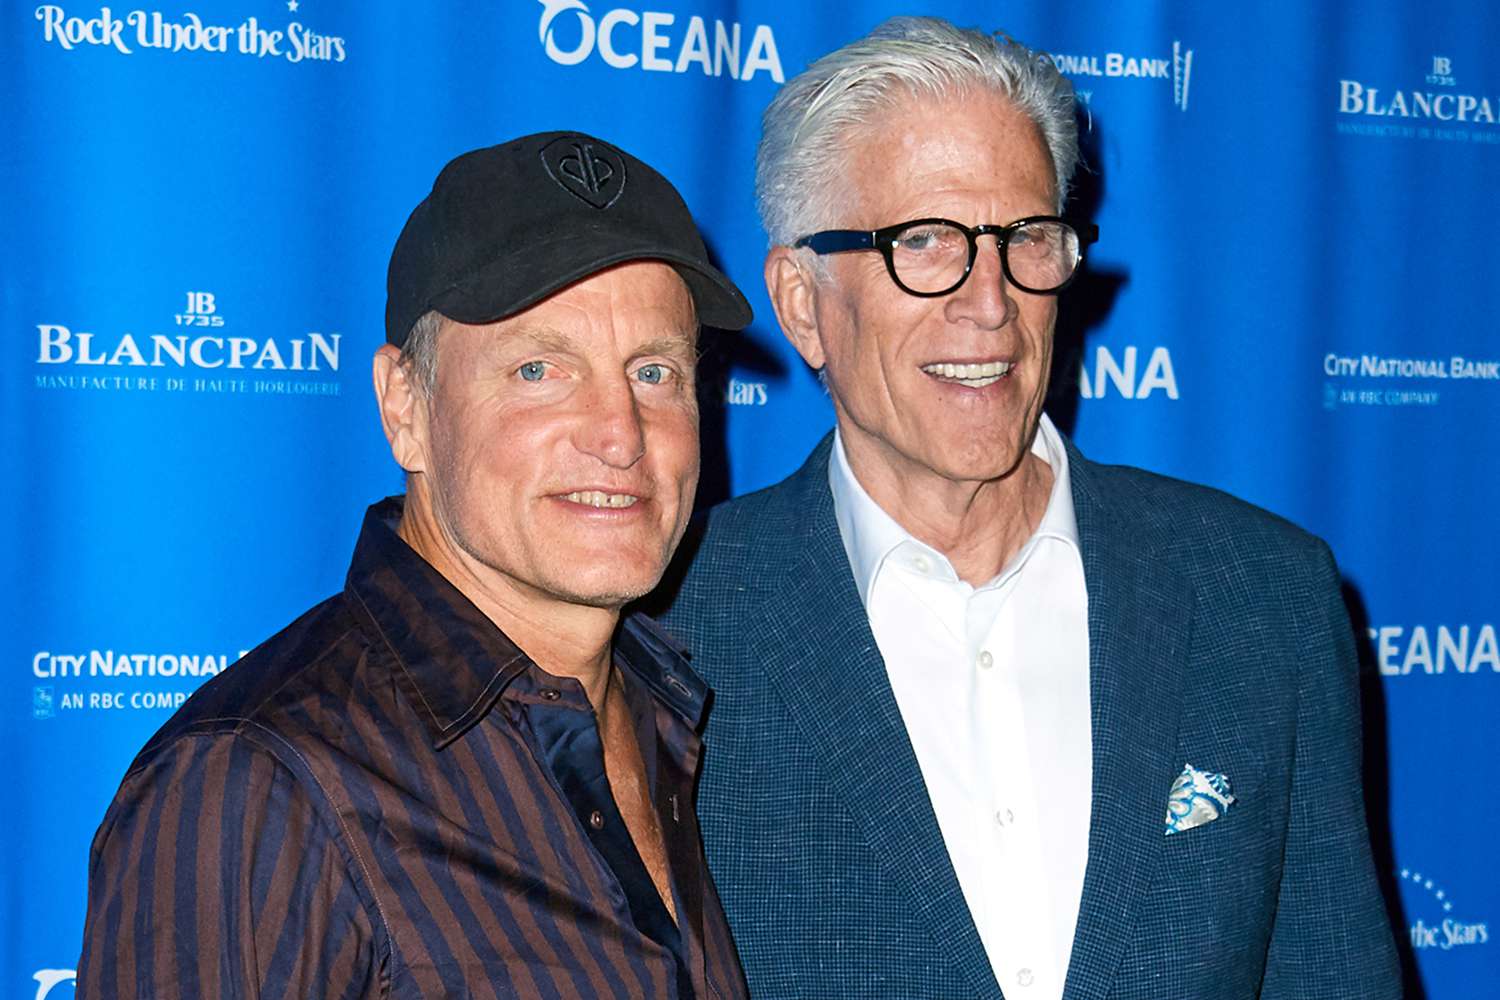 Woody Harrelson Got Into a 'Tumble' En Route to an Interview – and Ted Danson Patched Him Up